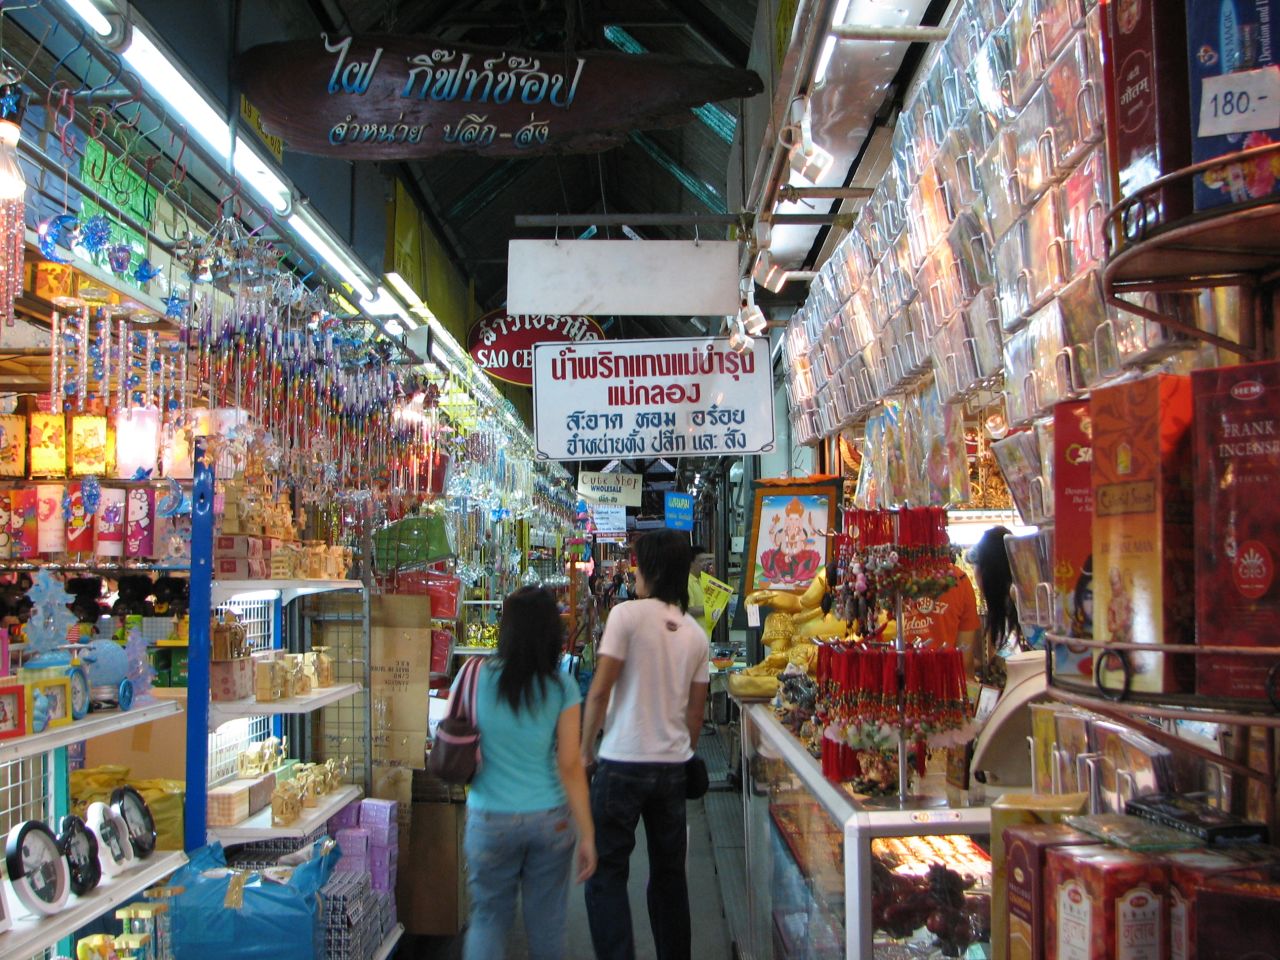 Chatuchak Weekend Market is a must-visit for shopaholics.